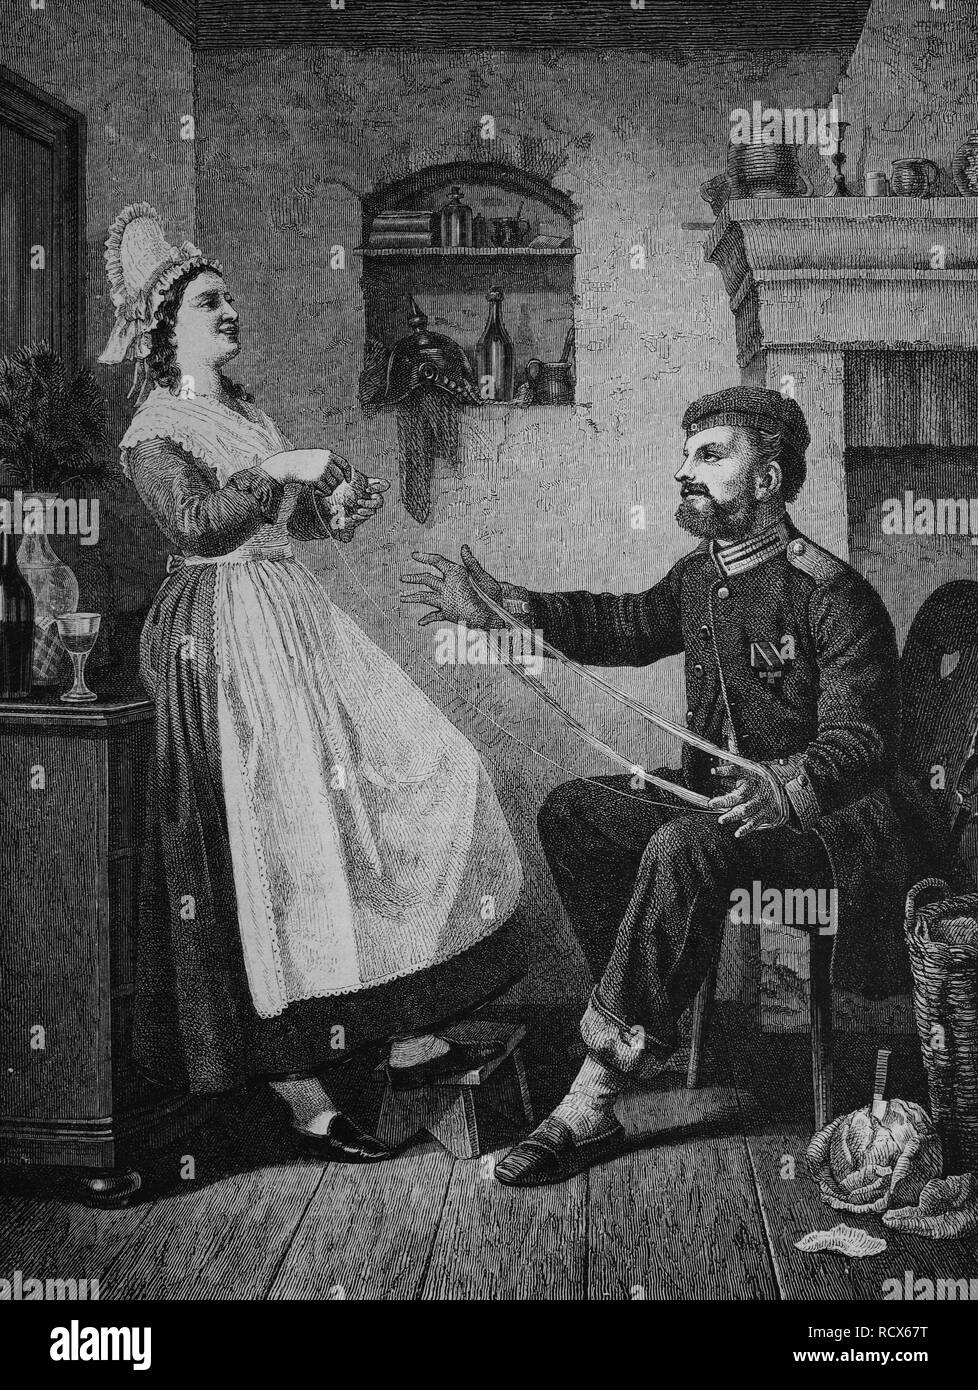 Landwehrmann und Hausmaedchen, a soldier of the Prussian and Imperial German reserve forces and a housemaid, wood engraving Stock Photo